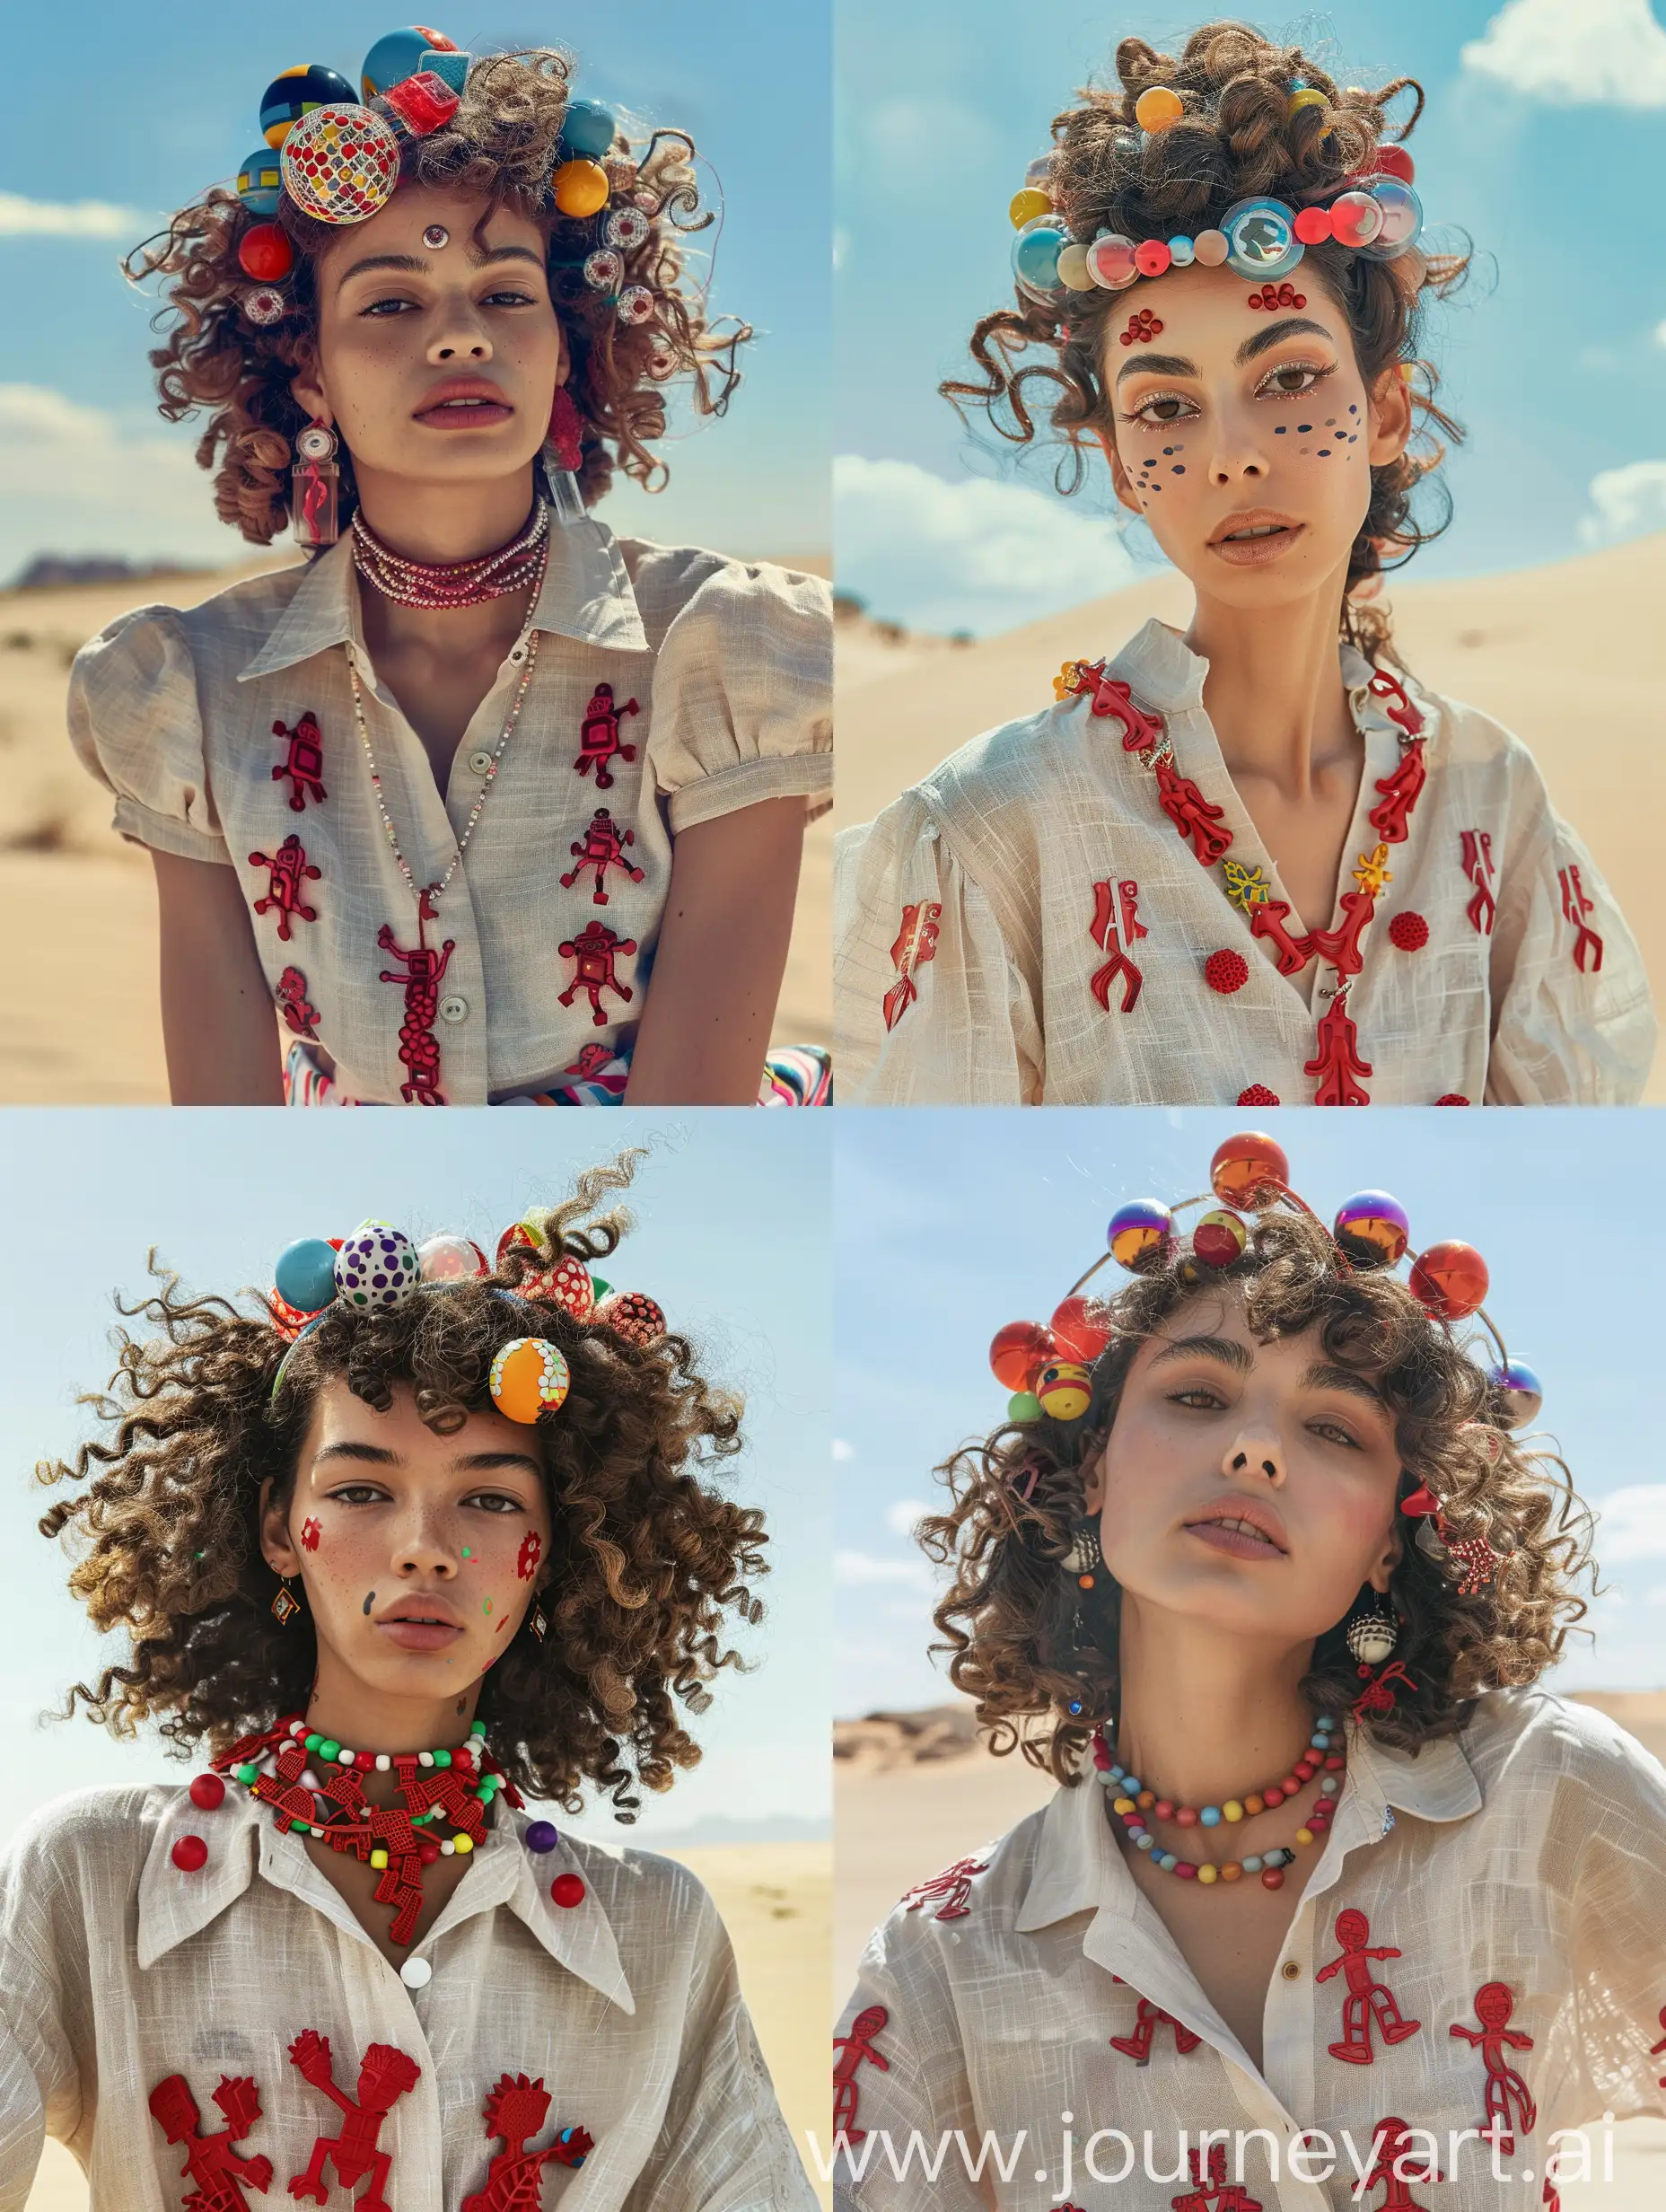 A woman with an attractive appearance, with luxurious curly hair adorned with a headband made of plastic and big colorful balls on it, a linen blouse adorned with red plastic figures designed on the blouse, multilayered plastic necklace, expressive facial features, a relaxed posture, the background is desert and sky, High-quality mirror camera, , HYPERREALISTIC PHOTOGRAPHY 